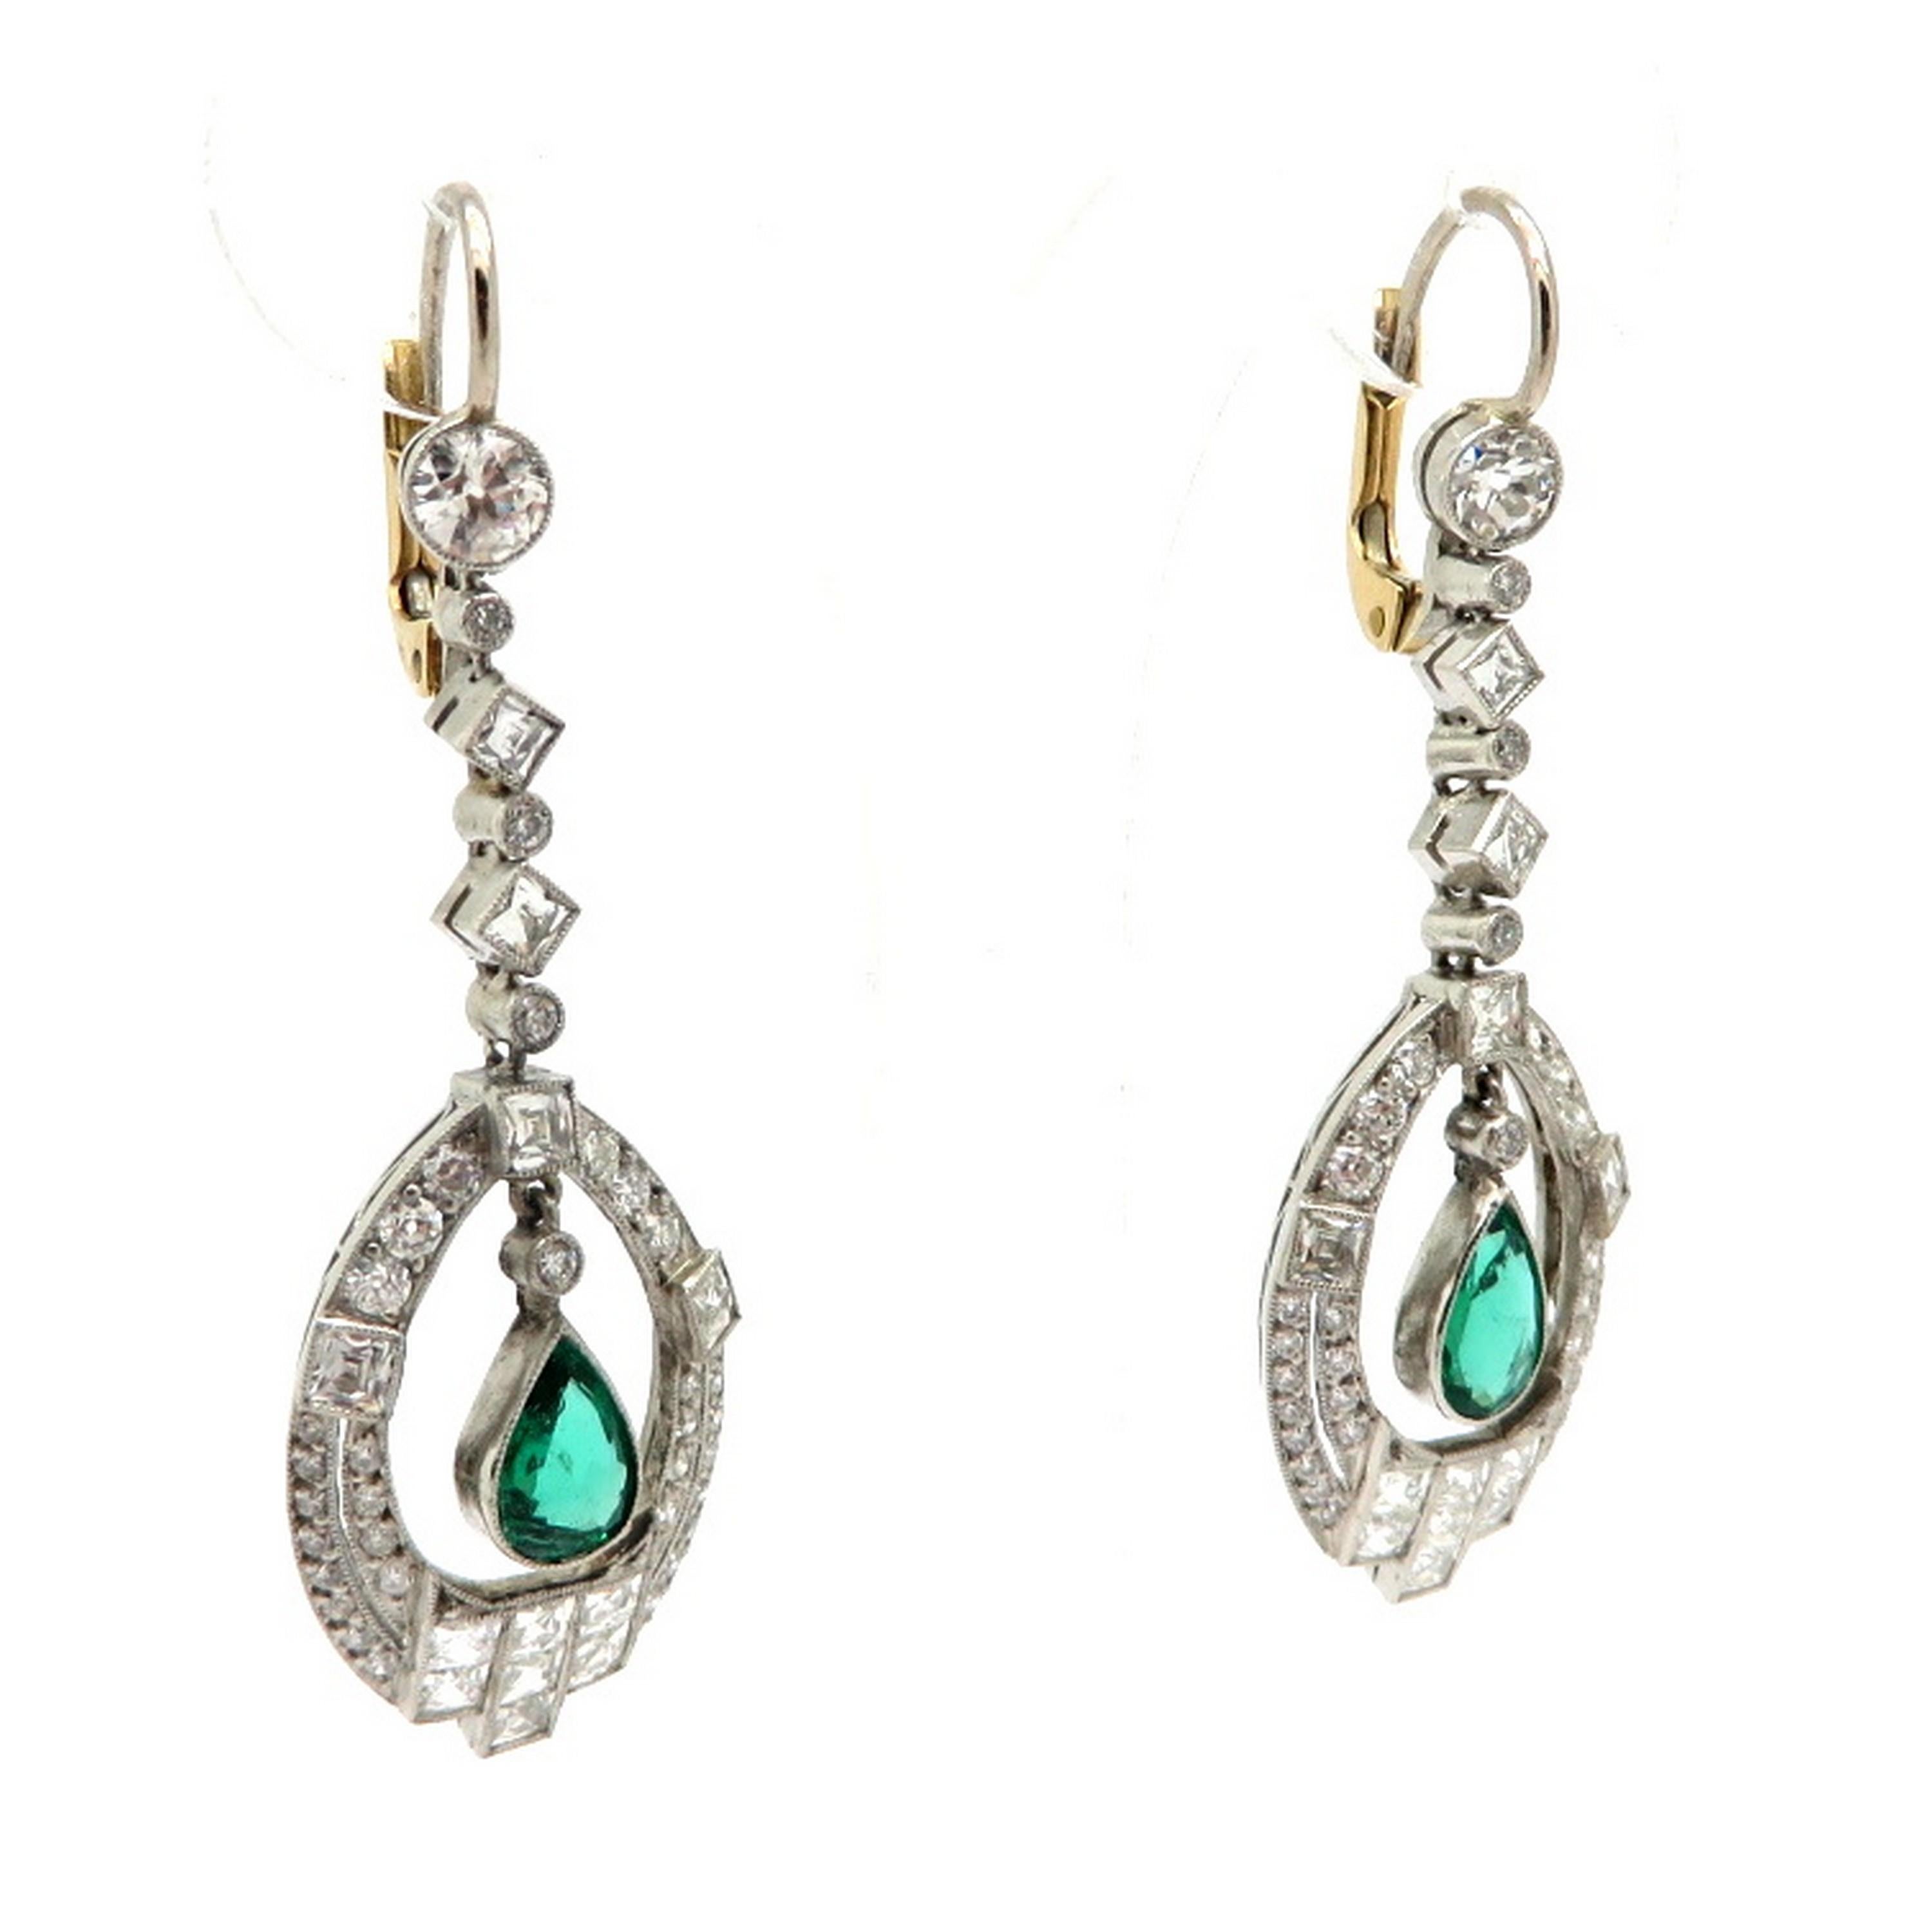 Estate Art Deco style platinum and 14K diamond and emerald dangle earrings. Showcasing 118 French cut and Old European cut diamonds, bead and bezel set, with various measurements, weighing a combined total of 2.26 carats. Diamond grading: color